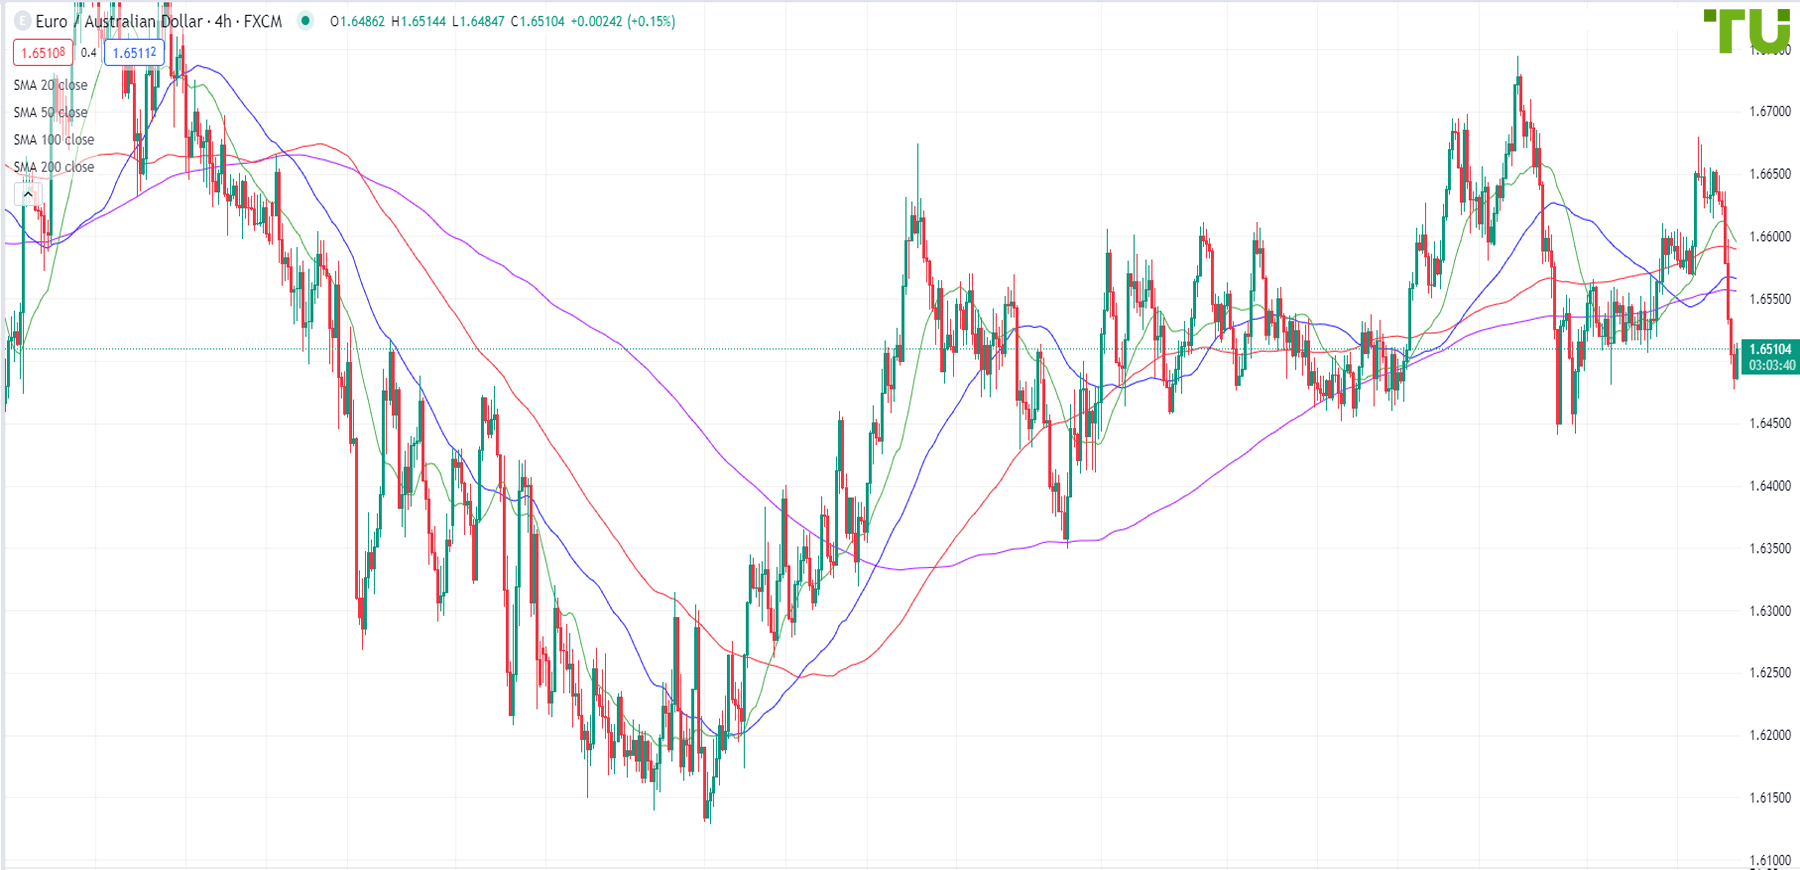 Euro/Kiwi declines after unsuccessful attempts to break through resistance